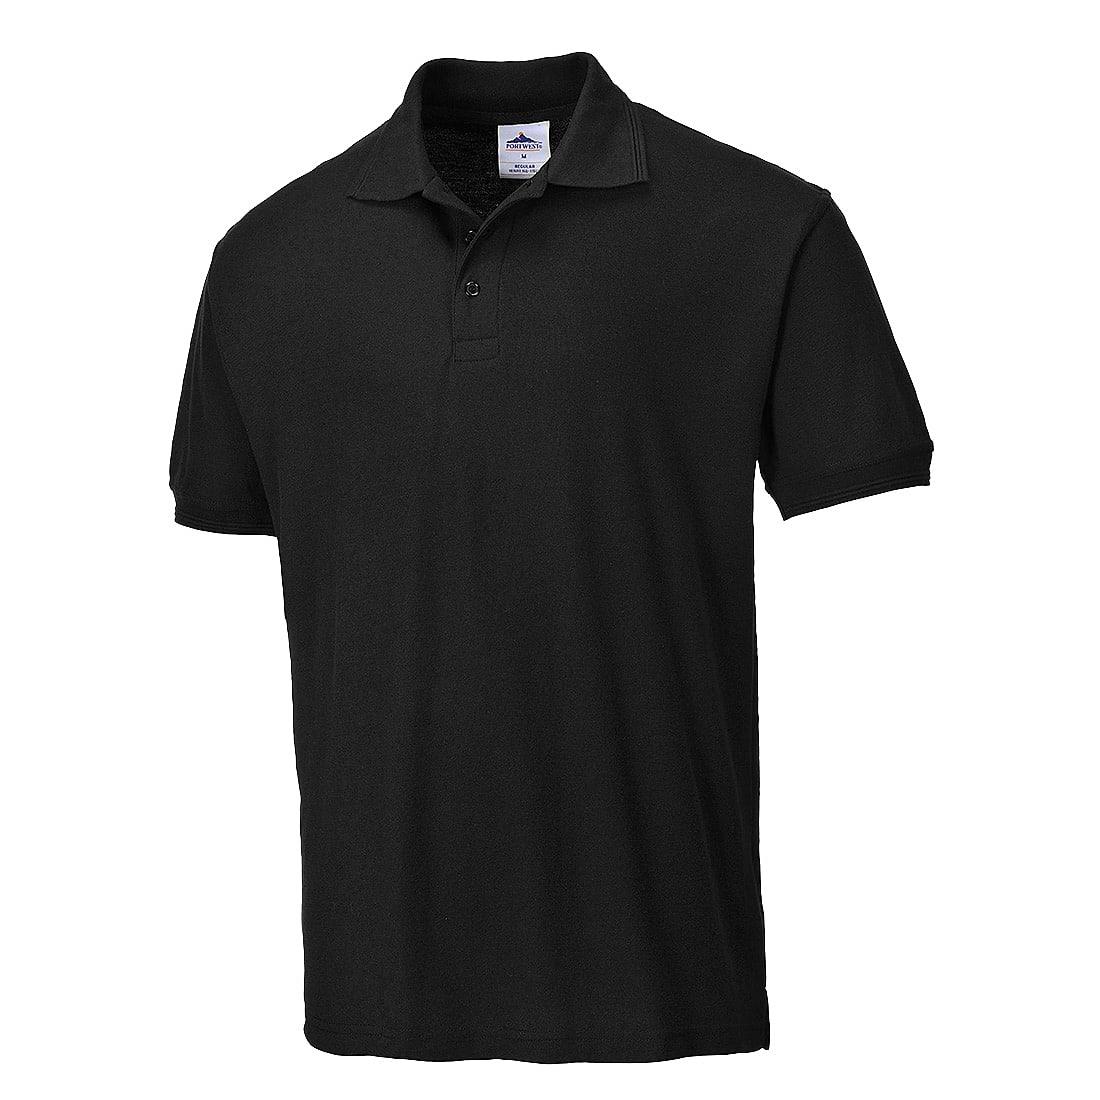 Portwest Verona Cotton Polo Shirt in Black (Product Code: B220)